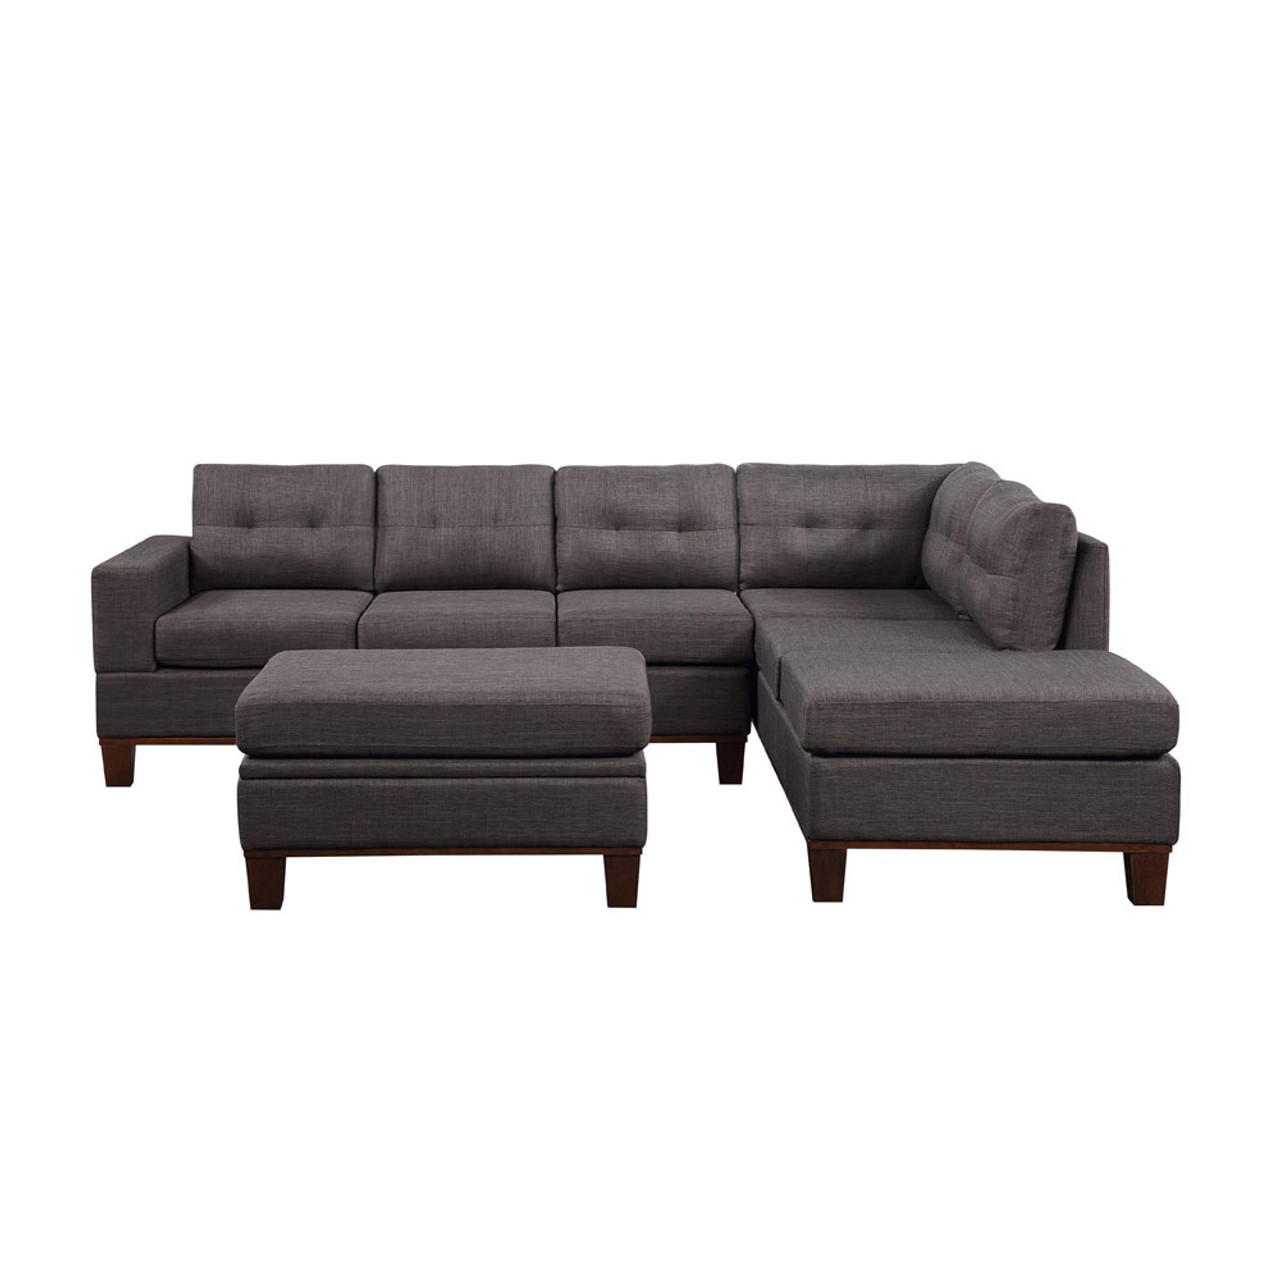 Hilo Dark Gray Fabric Reversible Sectional Sofa with Dropdown Armrest, –